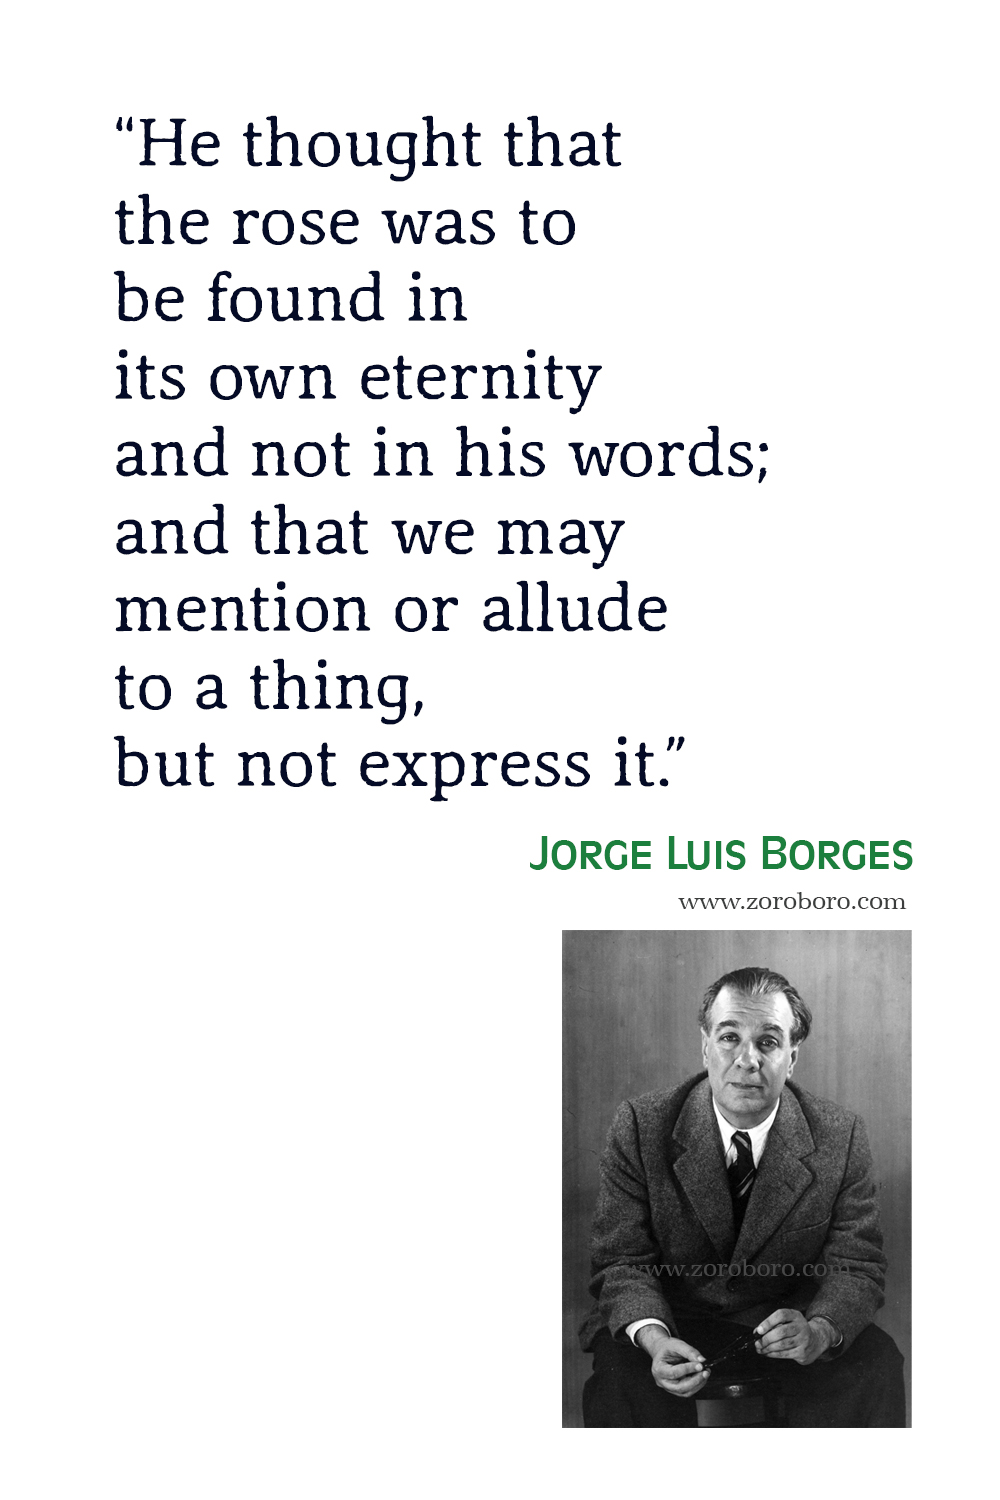 Jorge Luis Borges Quotes, Jorge Luis Borges, Labyrinths: Selected Stories & Other Writings, Jorge Luis Borges Poems, Books, Jorge Luis Borges Poetry.